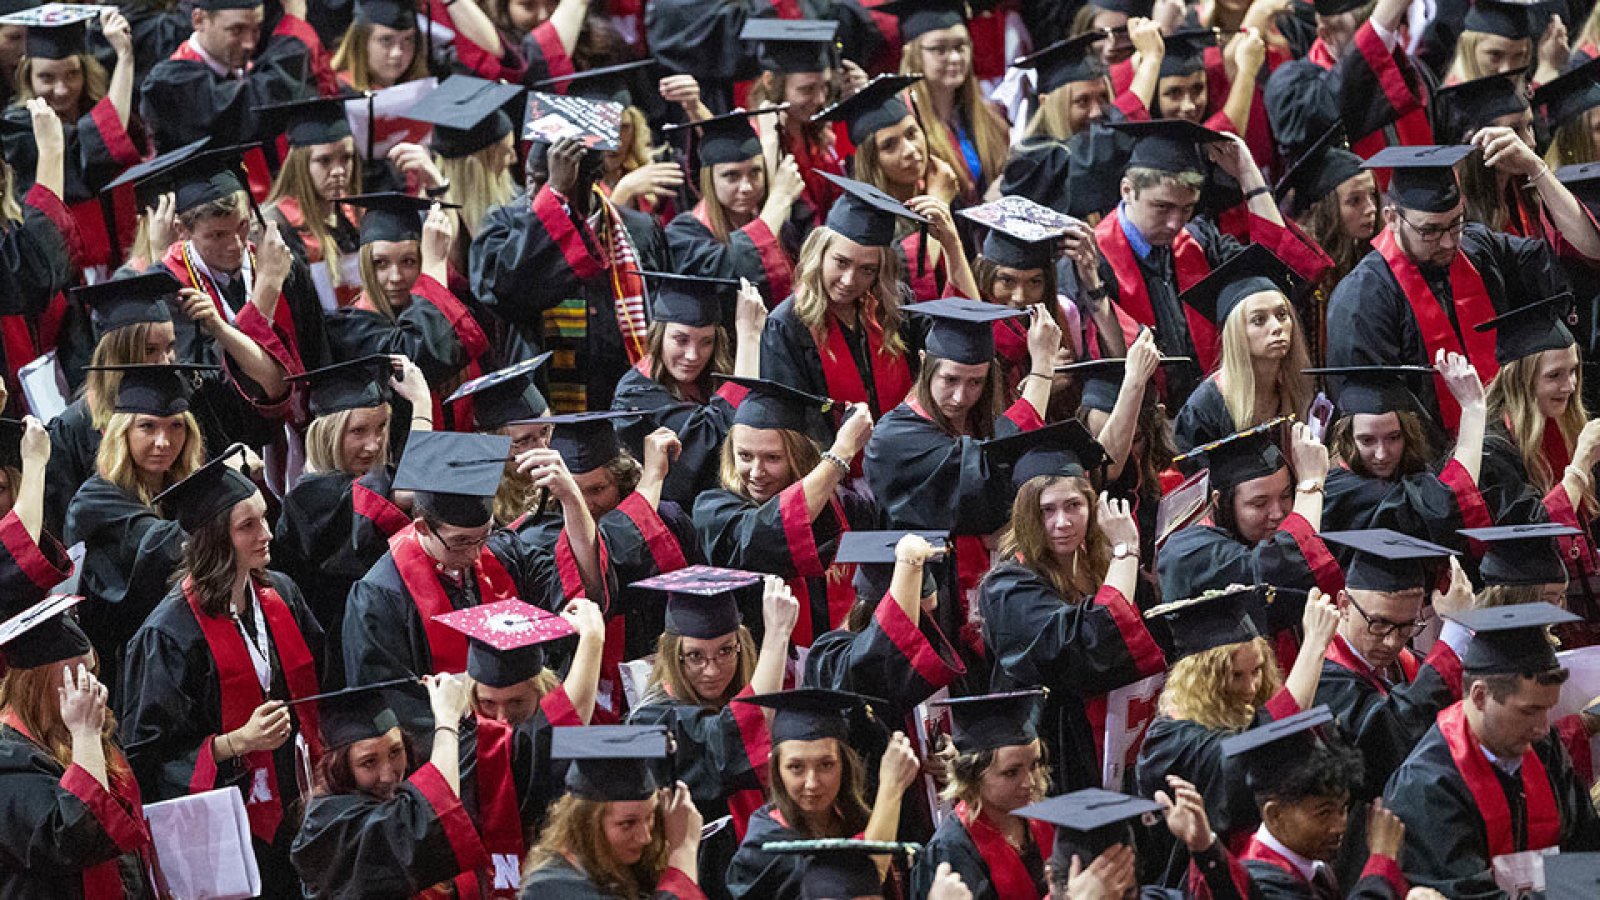 Of the record 246 seniors graduating on May 14 from the University of Nebraska-Lincoln Honors Program, 45 are students from the College of Engineering.